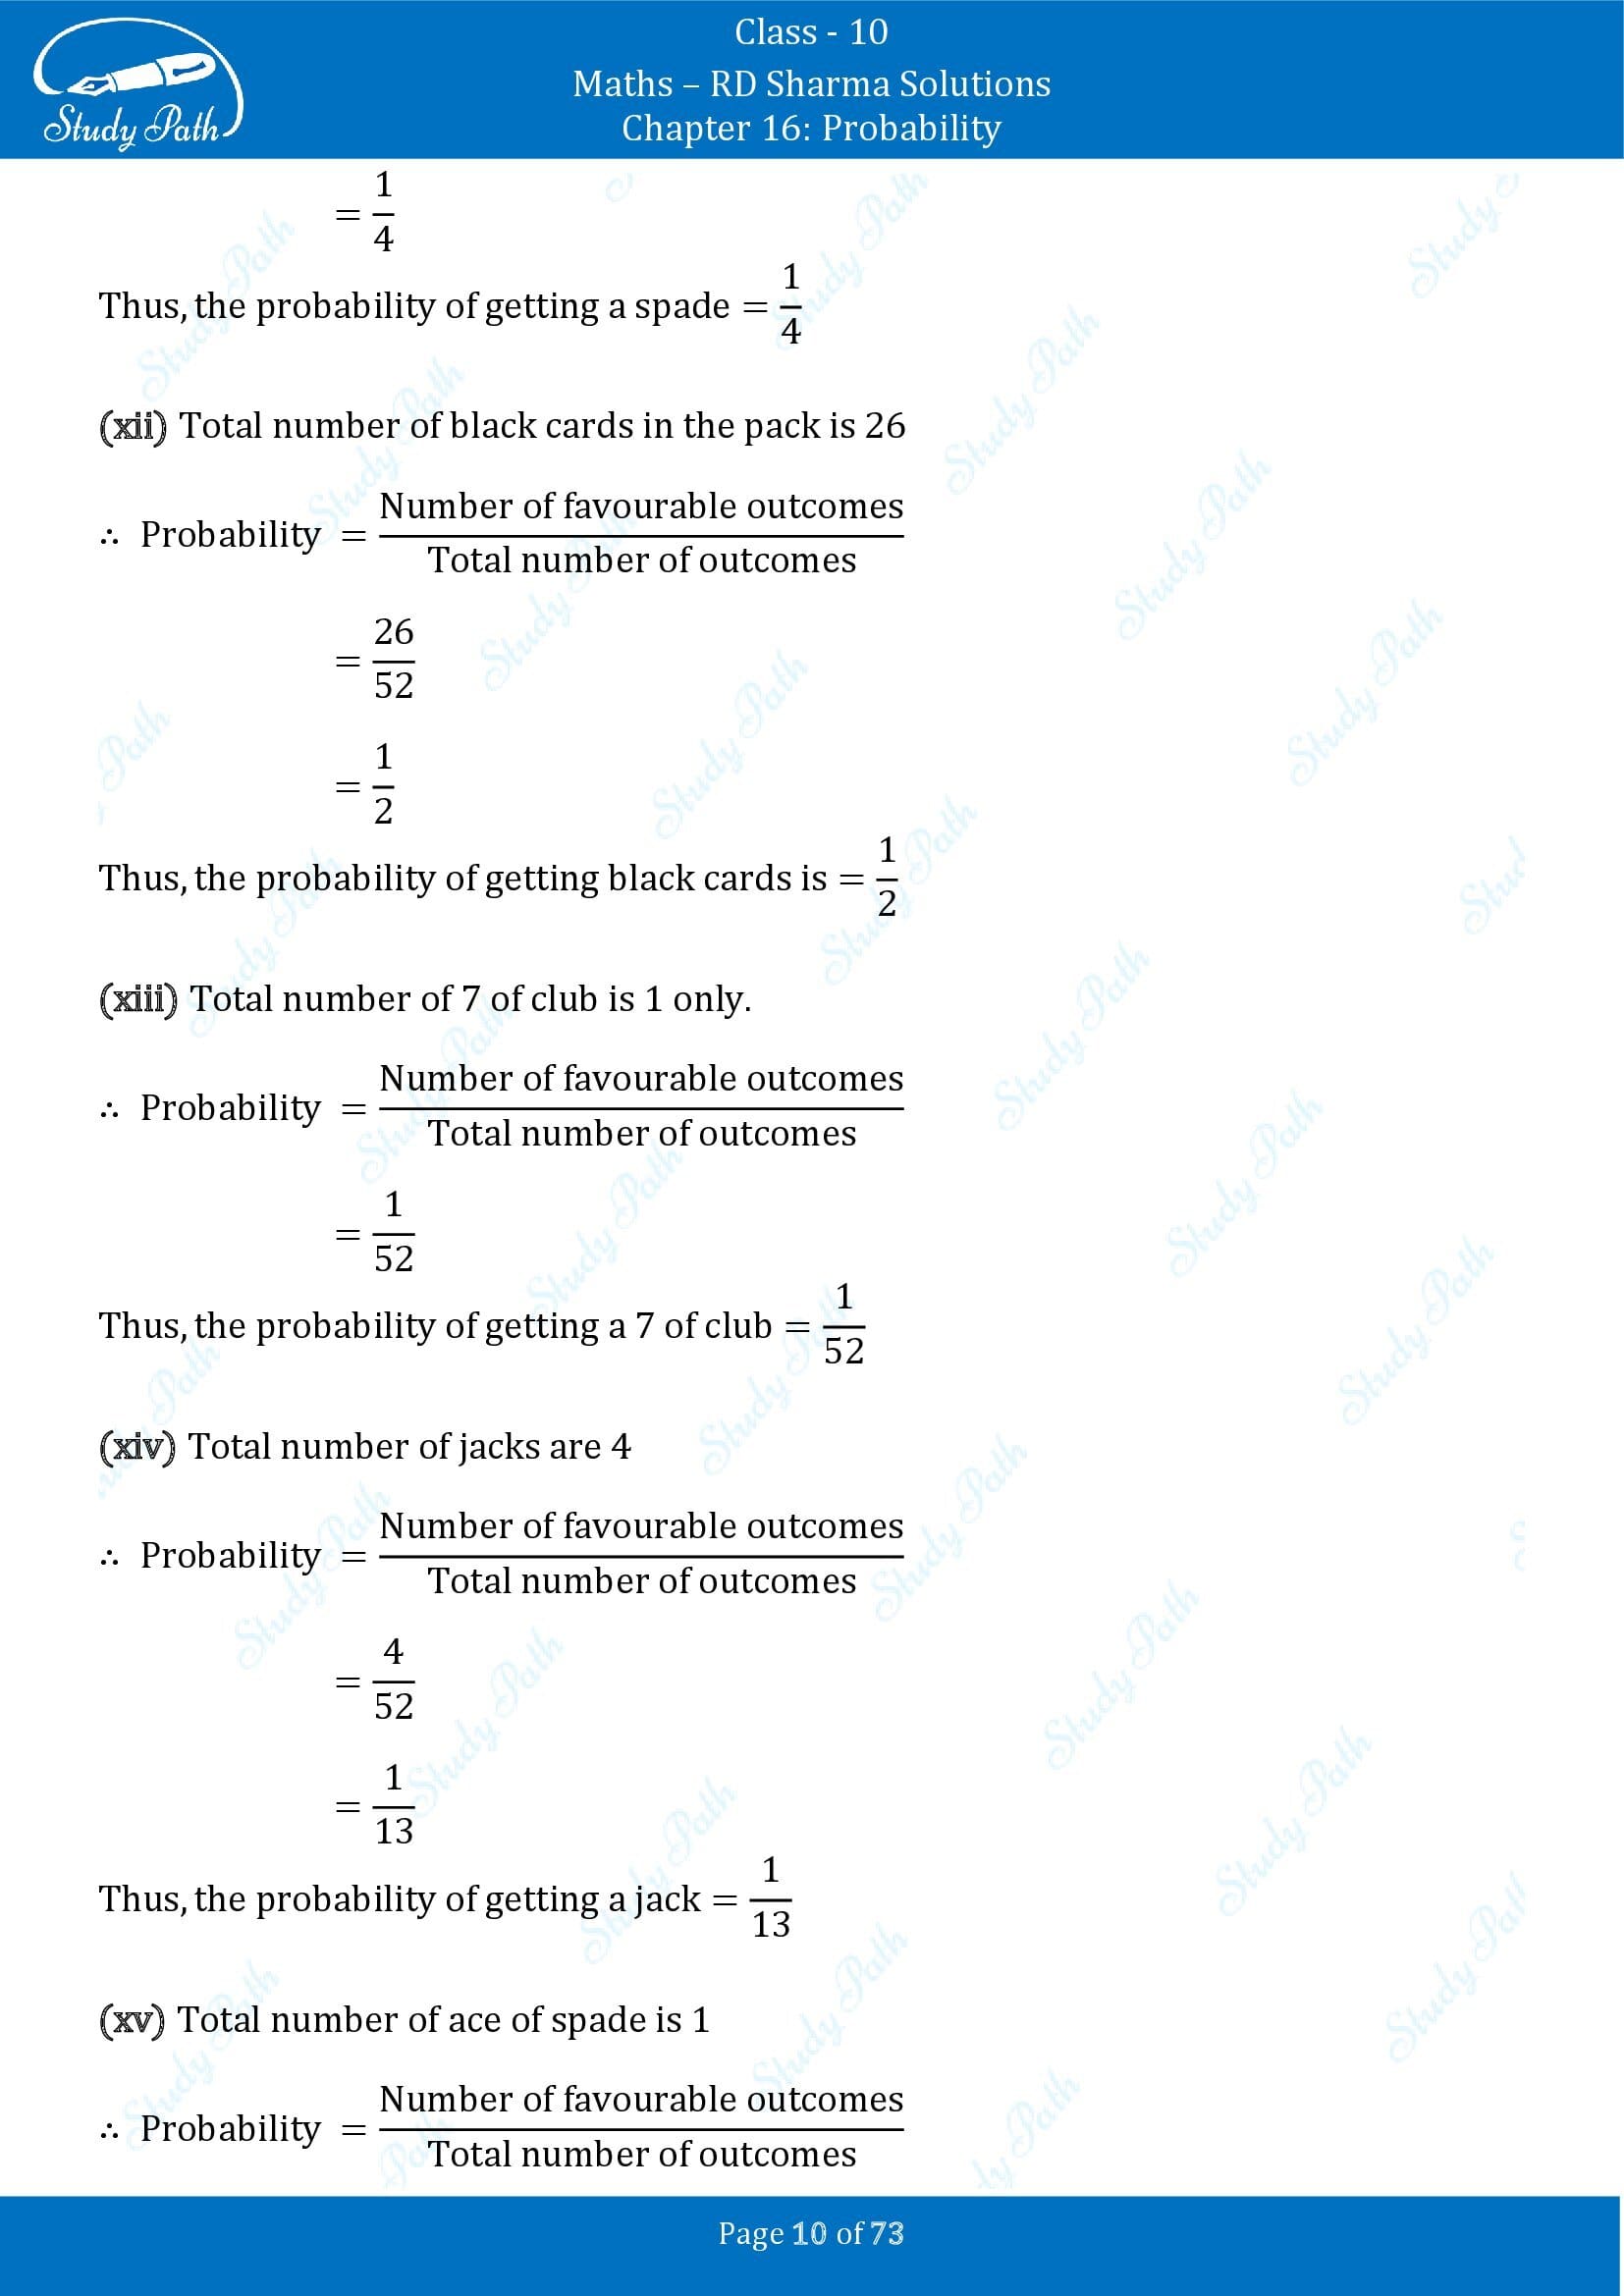 RD Sharma Solutions Class 10 Chapter 16 Probability Exercise 16.1 00010